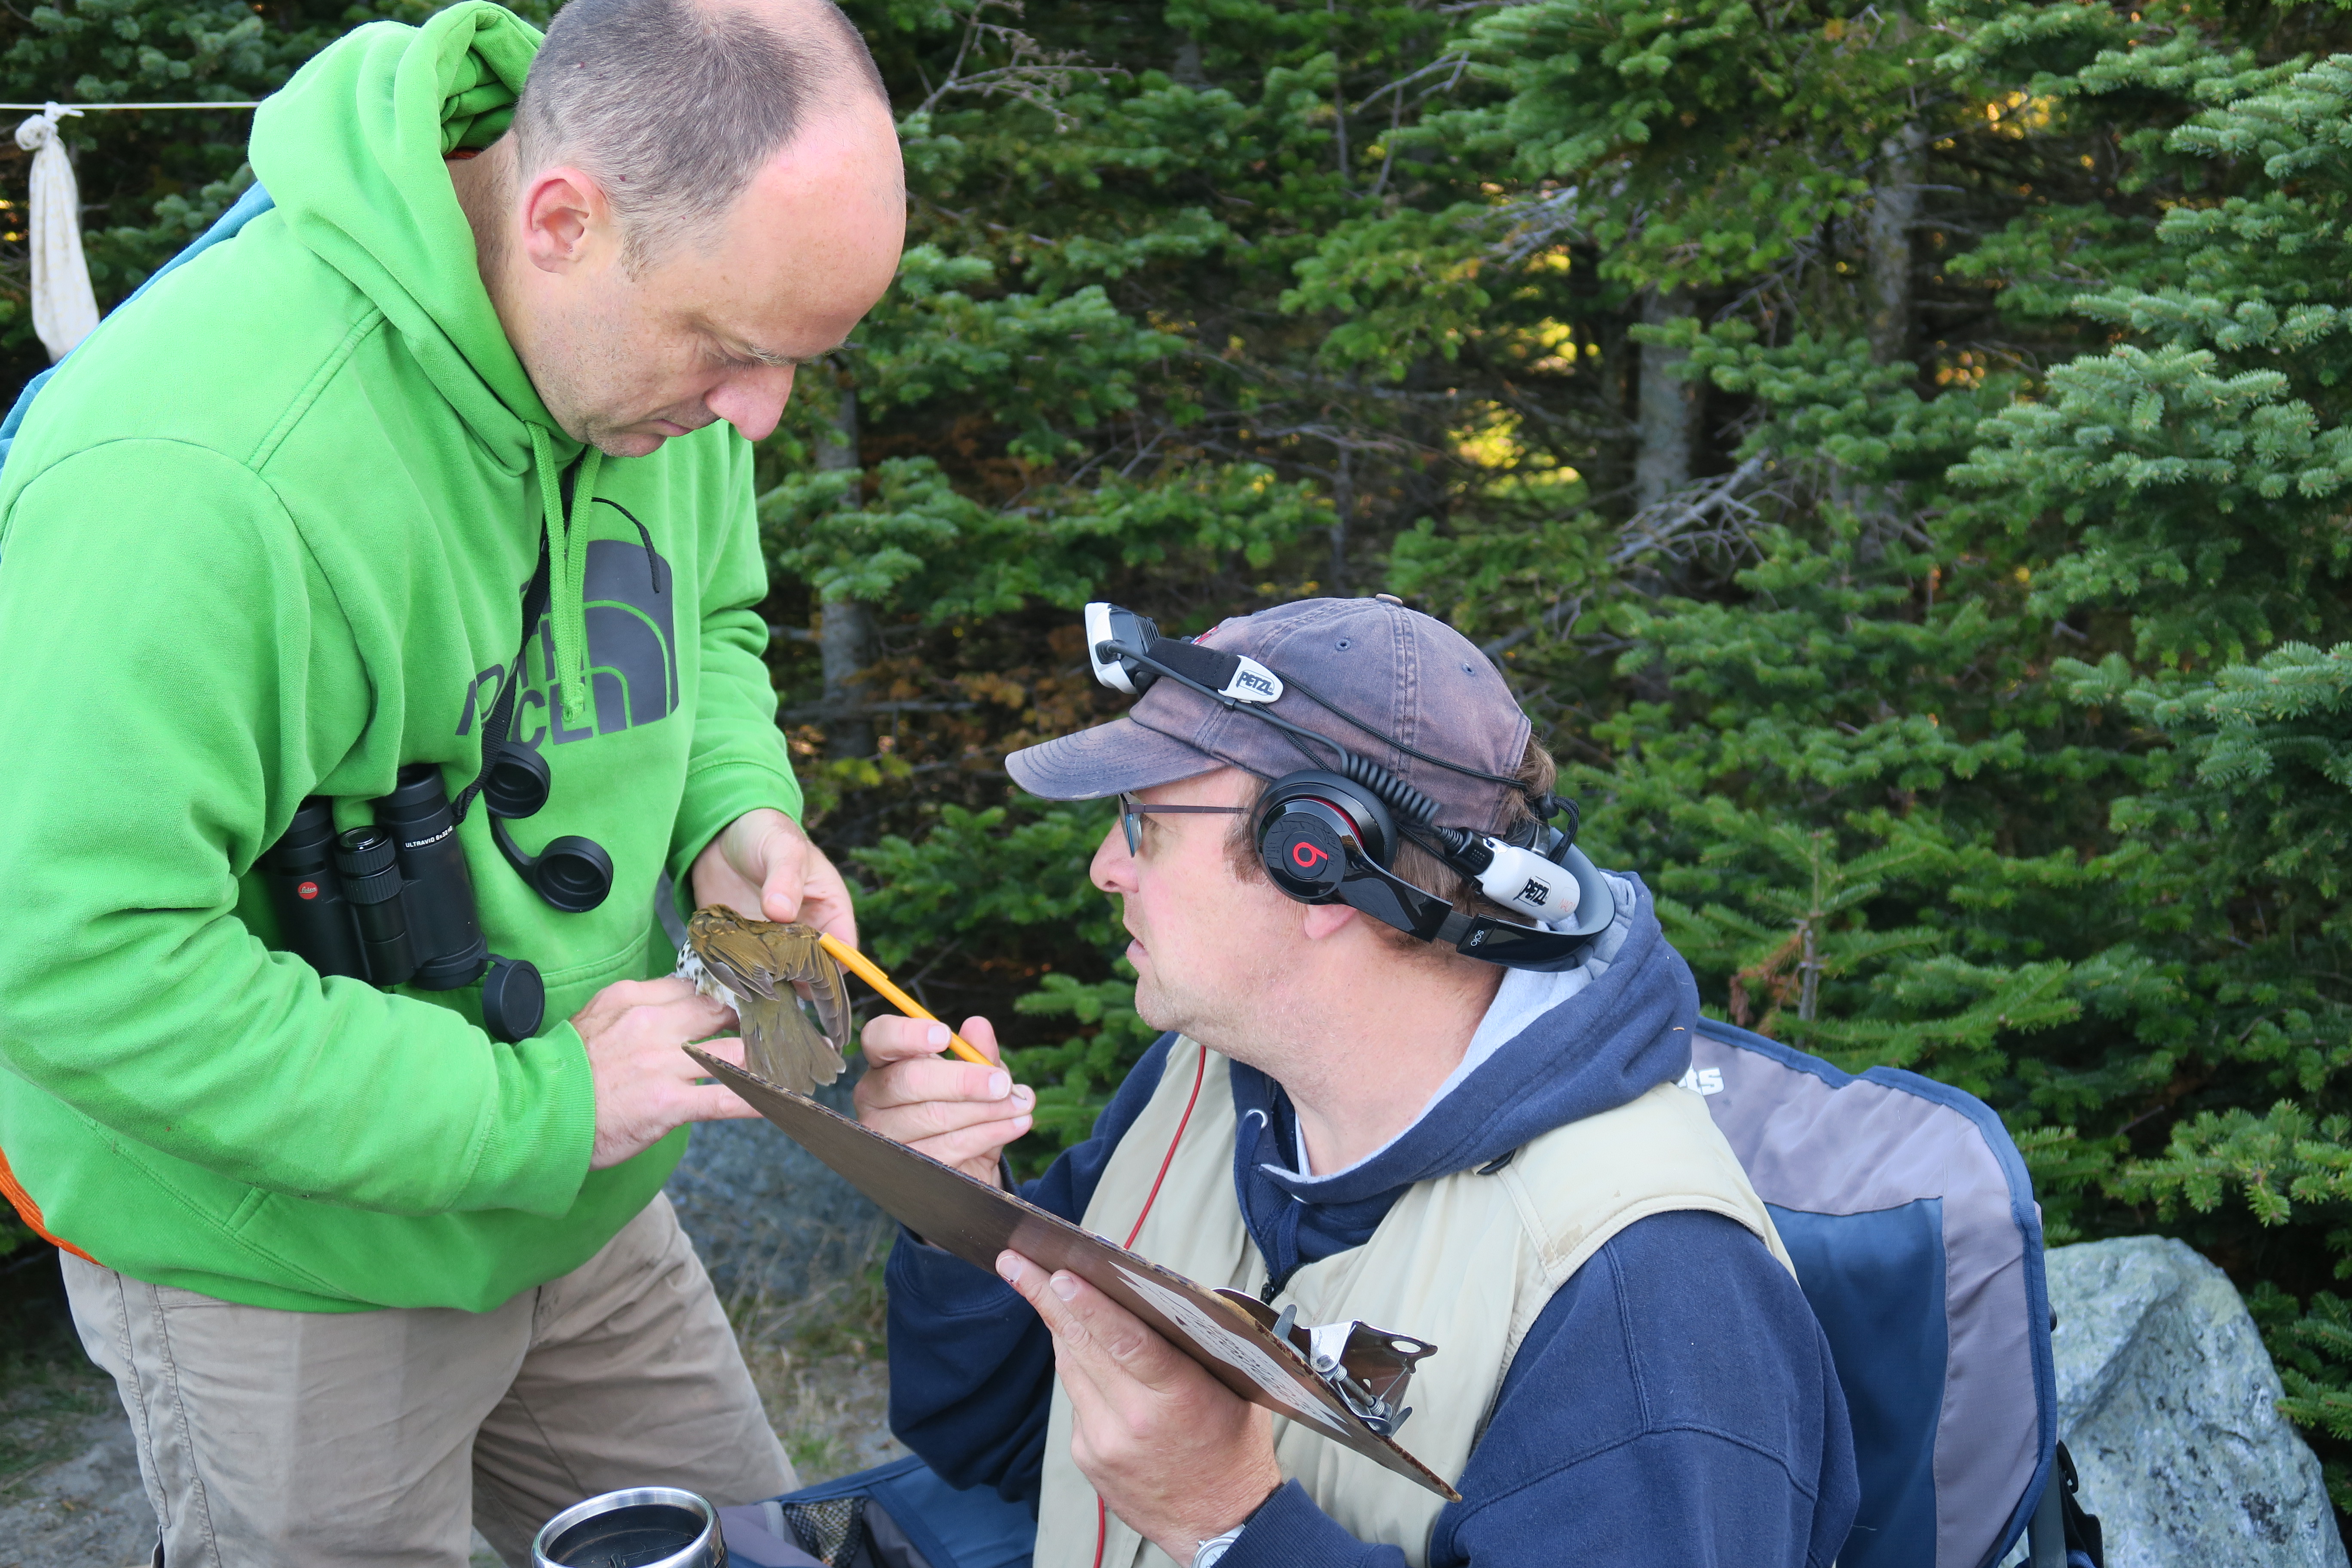 VCE's John Lloyd and Kent P. McFarland preparing to measure a Bicknell’s thrush captured on Mt. Mansfield.